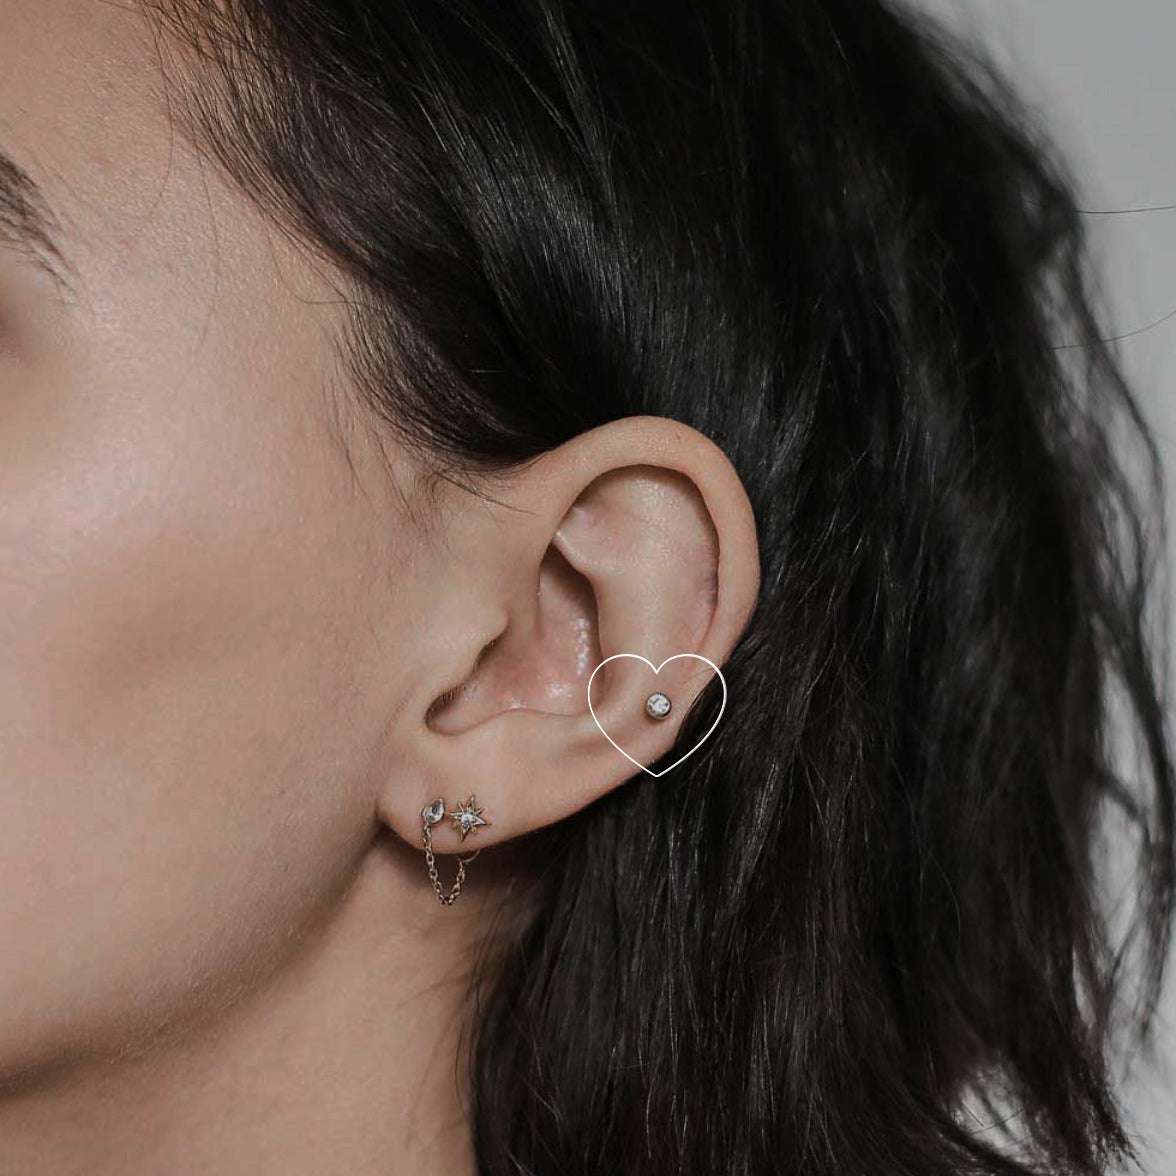 Cartilage Piercings: Everything You'll Need